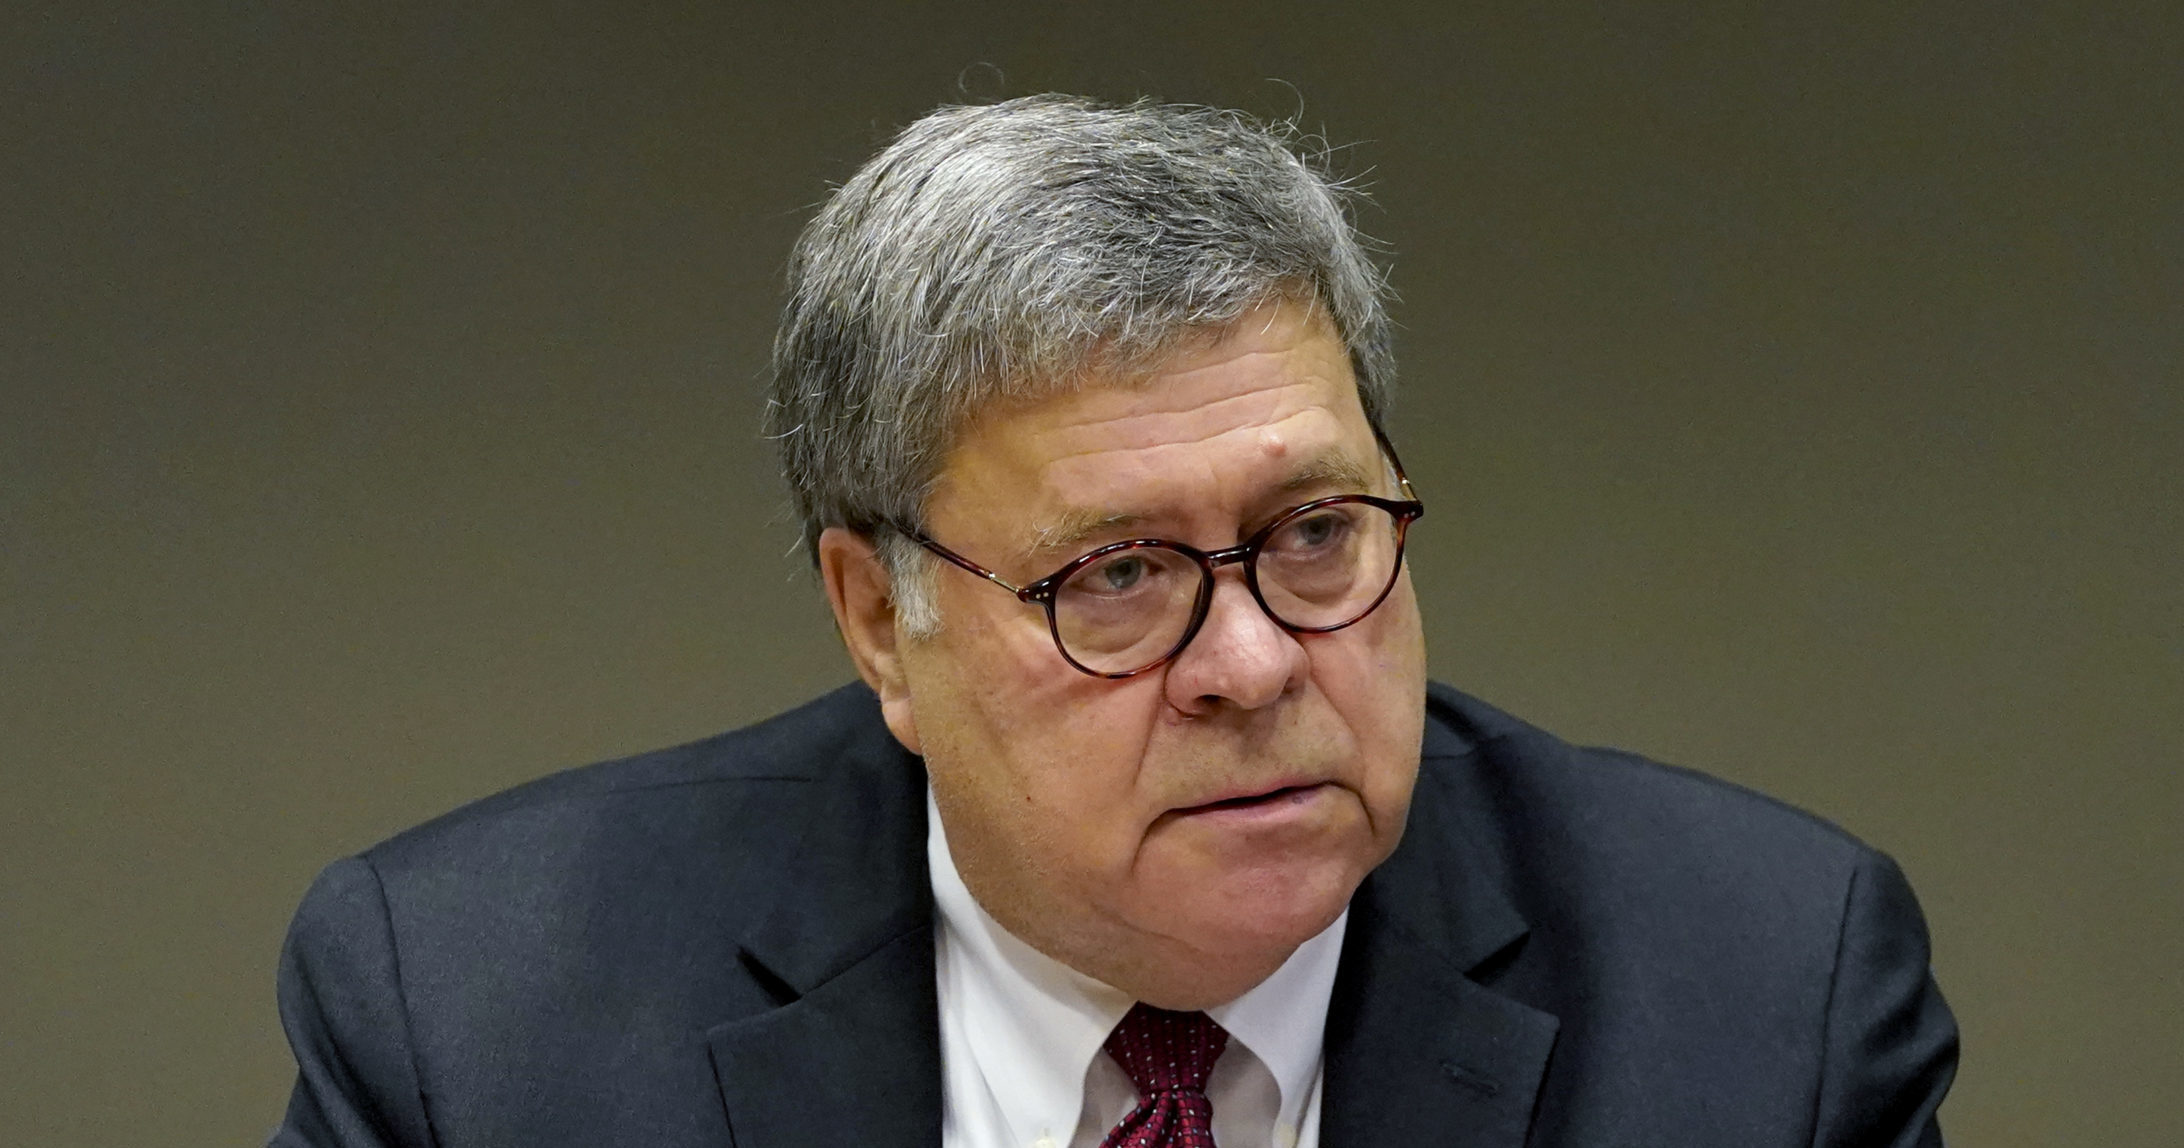 Attorney General William Barr meets with members of the St. Louis Police Department in St. Louis. Barr has announced he is resigning.